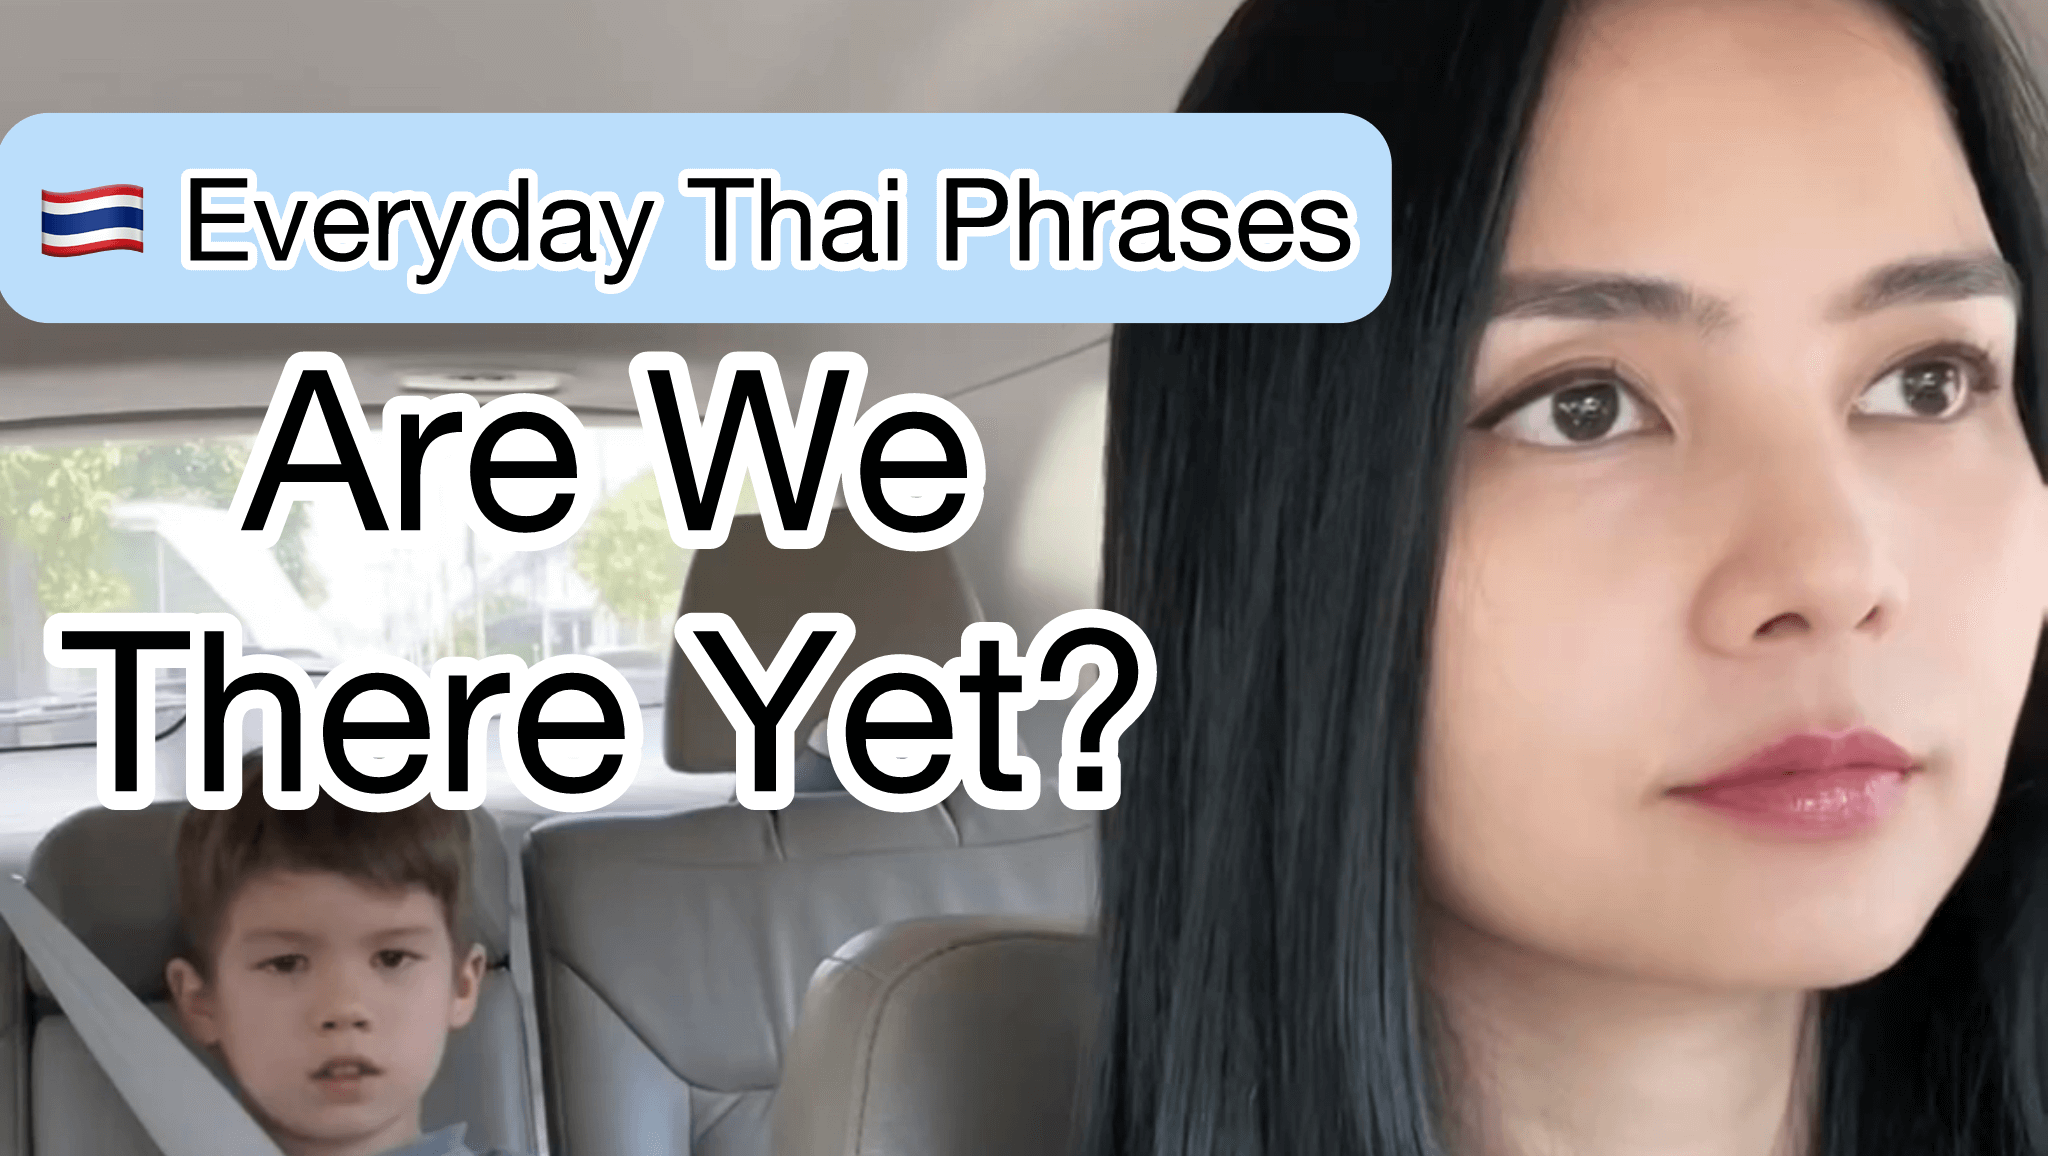 Everyday Thai Phrases: Are We There Yet?